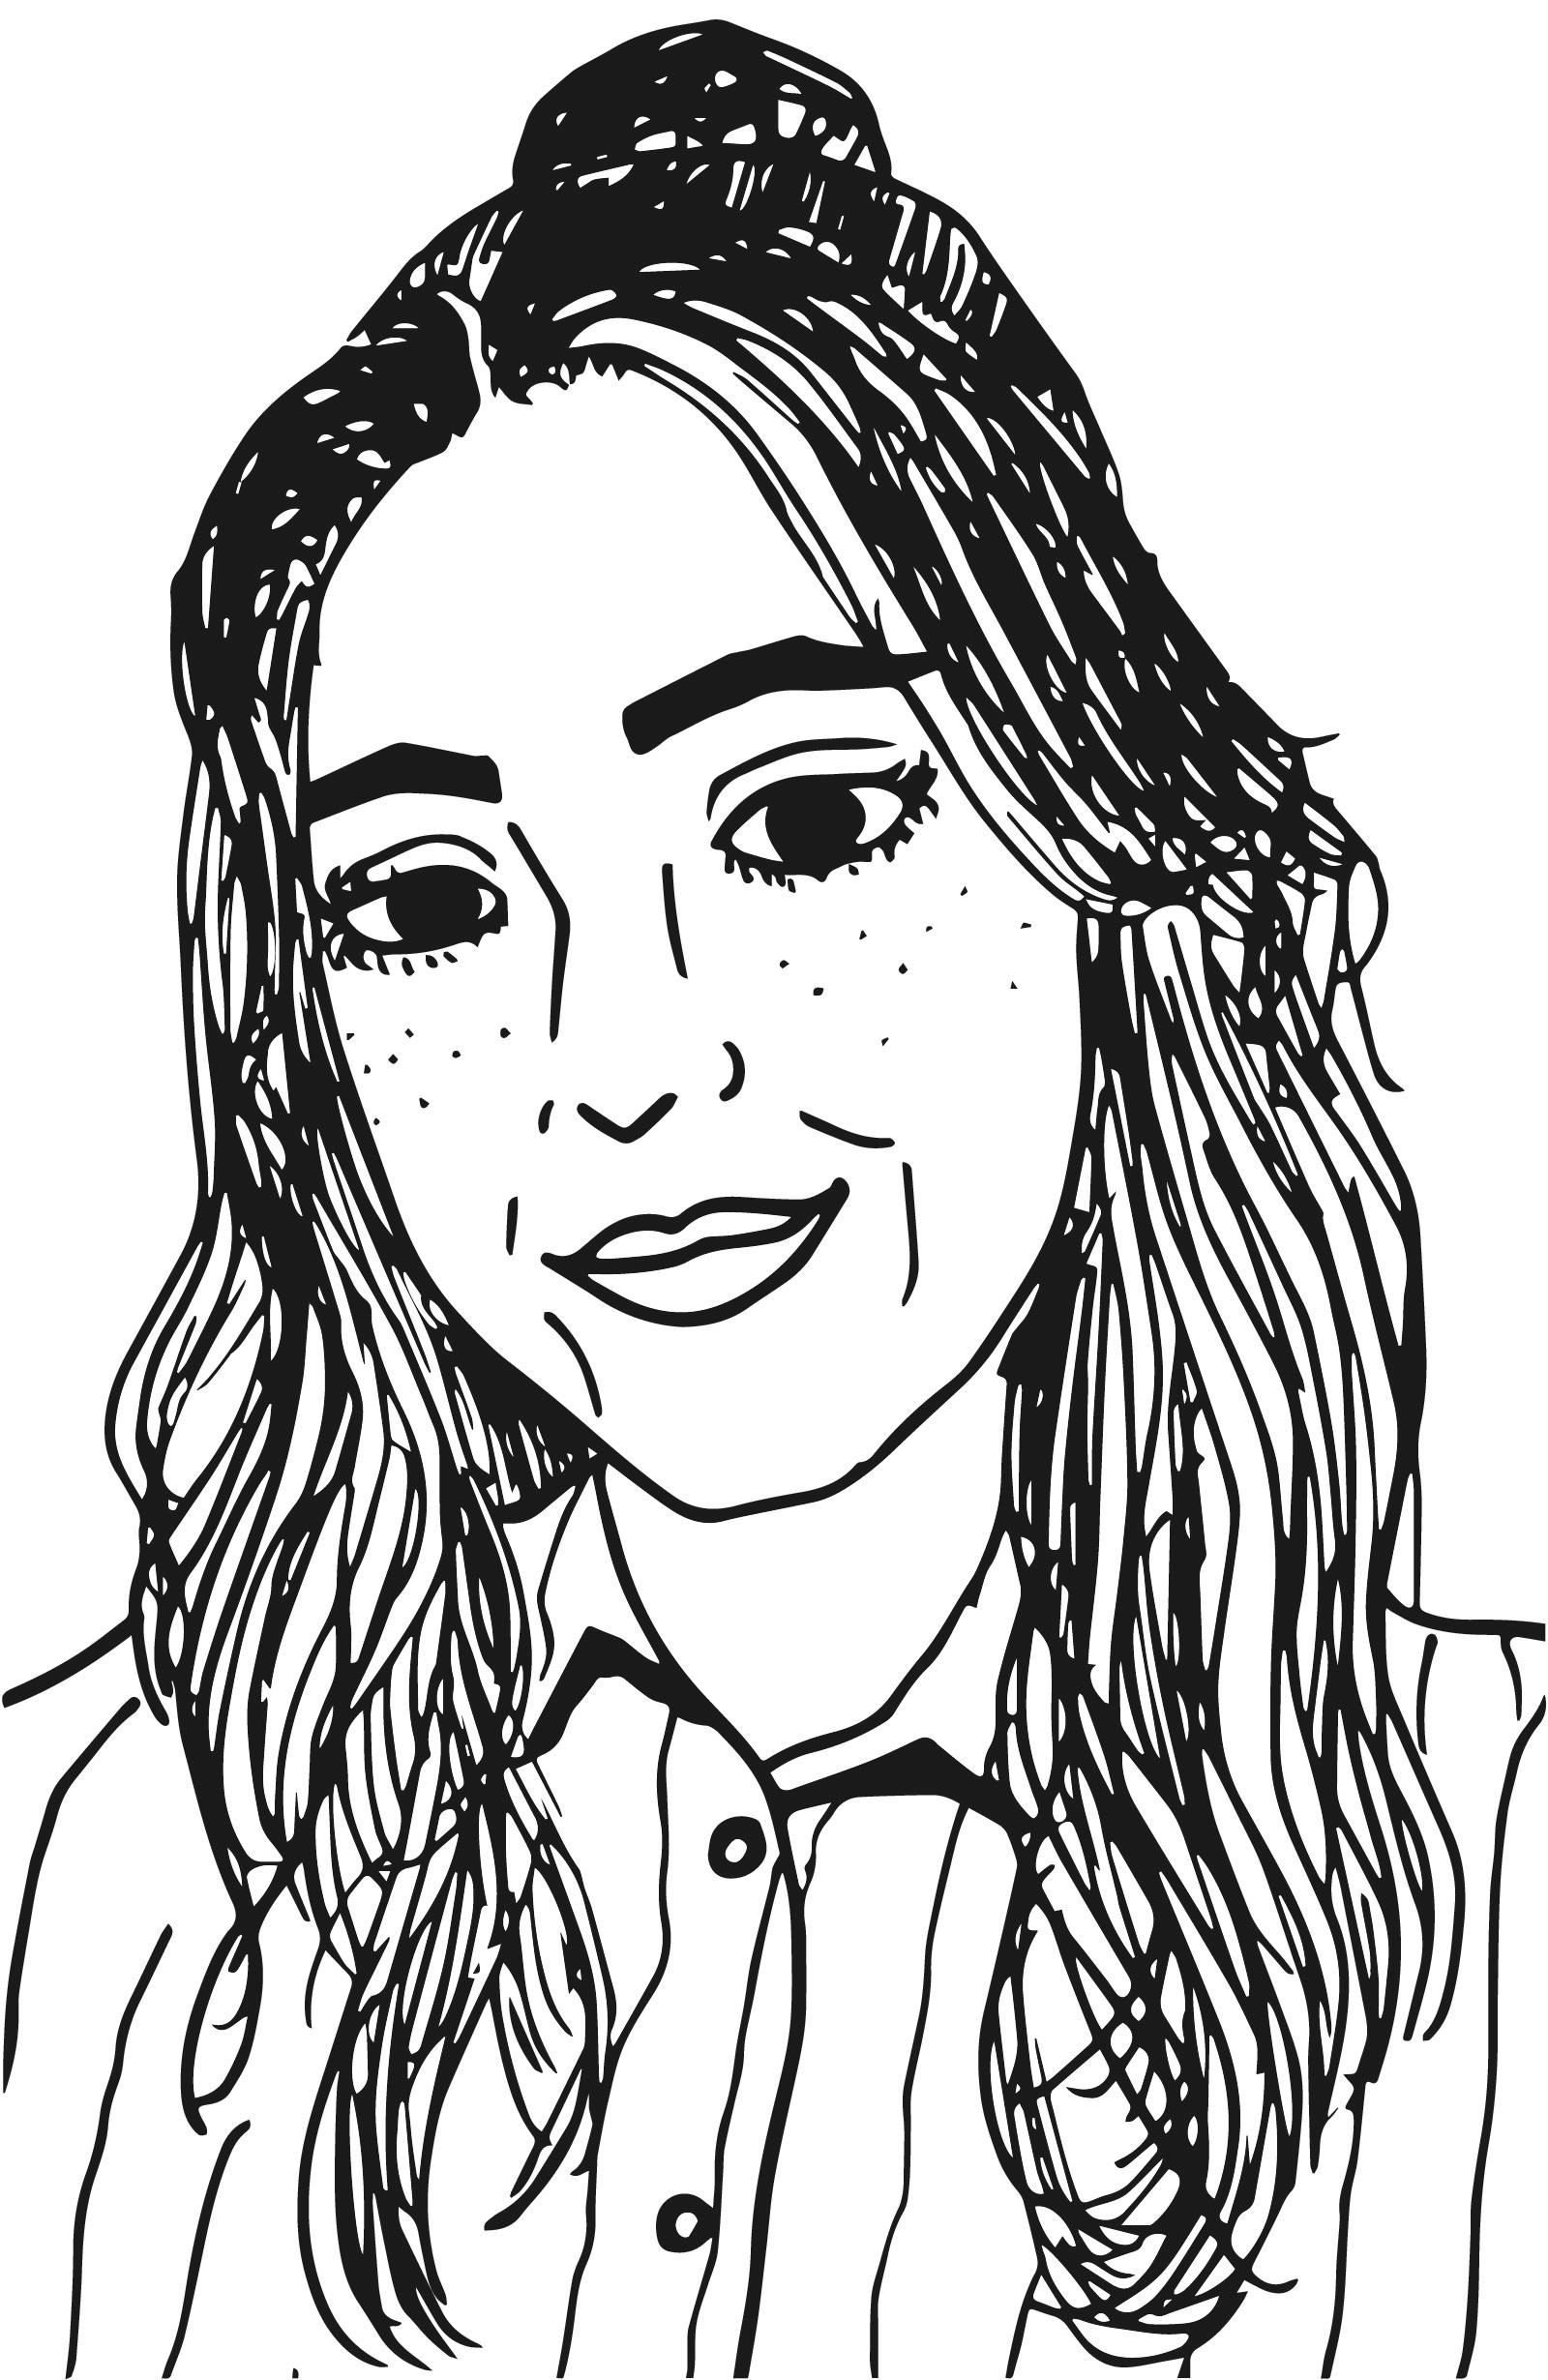 A black and white drawing of Juliana Sy softly smiling, with her head tilted to the left. Her hair is partly knotted into a bun and she wears a dress shirt with collars.